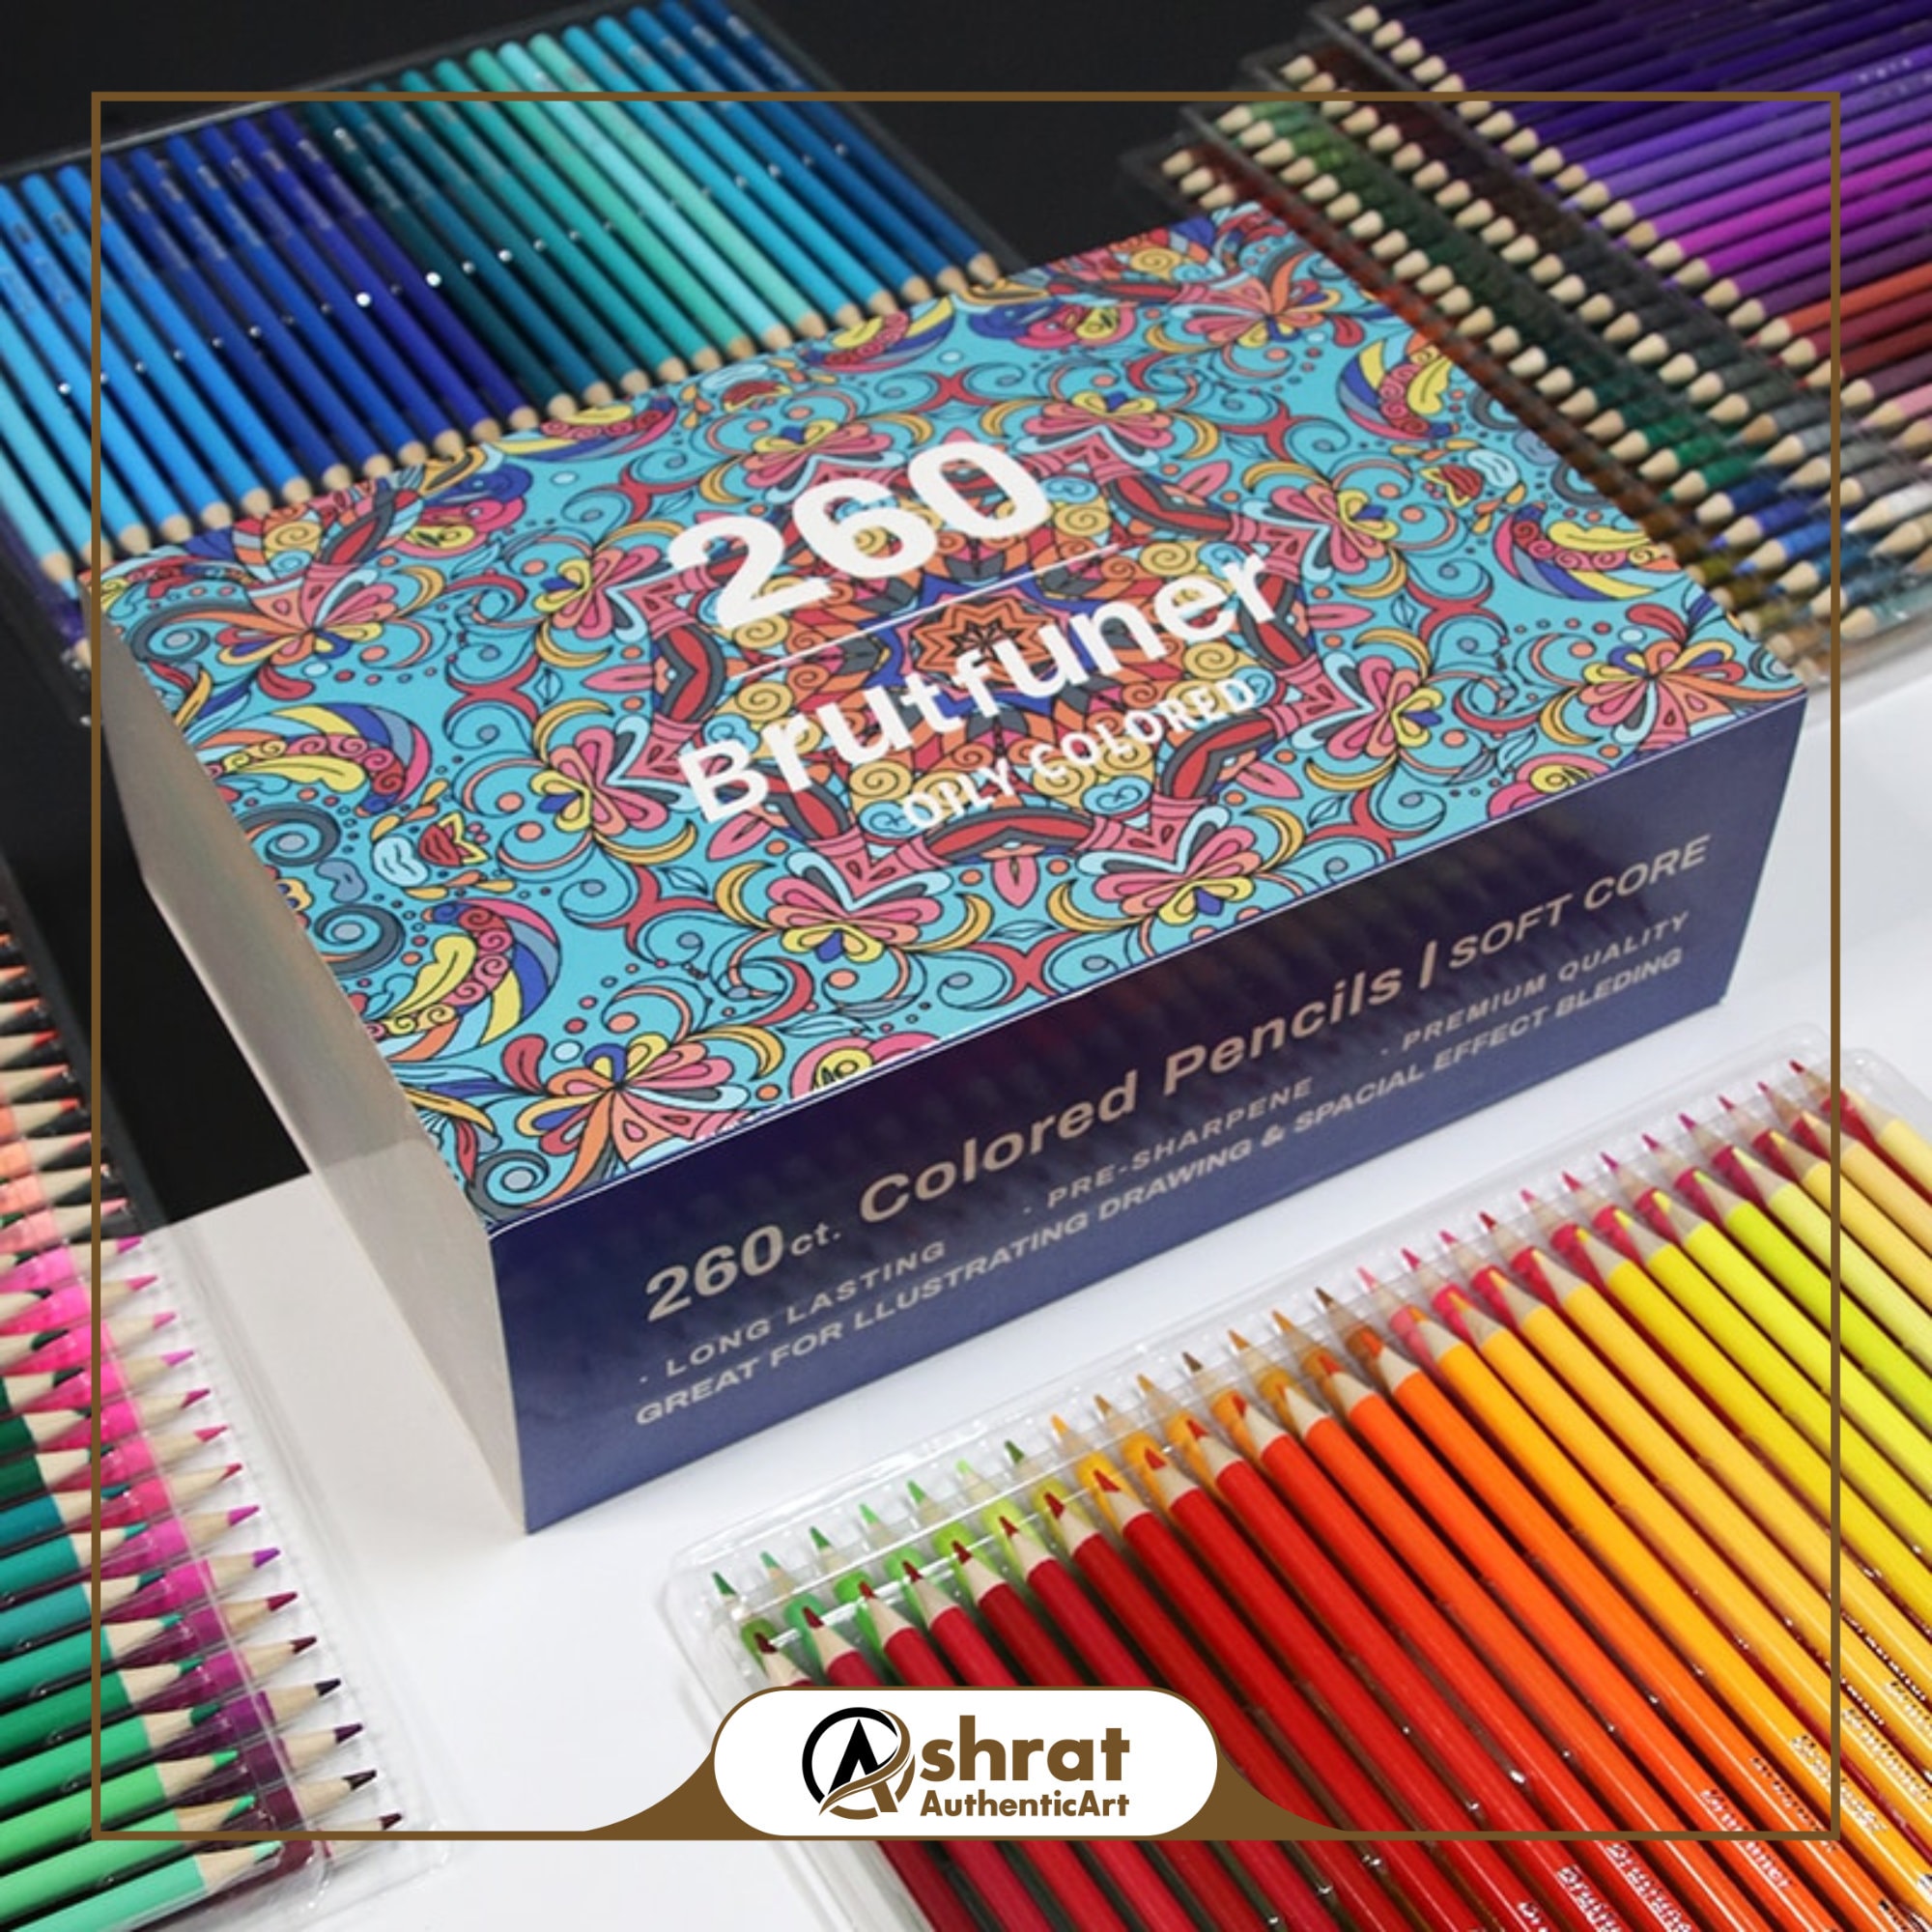 Brutfuner Colored Pencils Set-oil, Wood,and Watercolor-12/48/120/160/260  Pencils for Drawing,sketching,and Art Projects-high-quality Set 